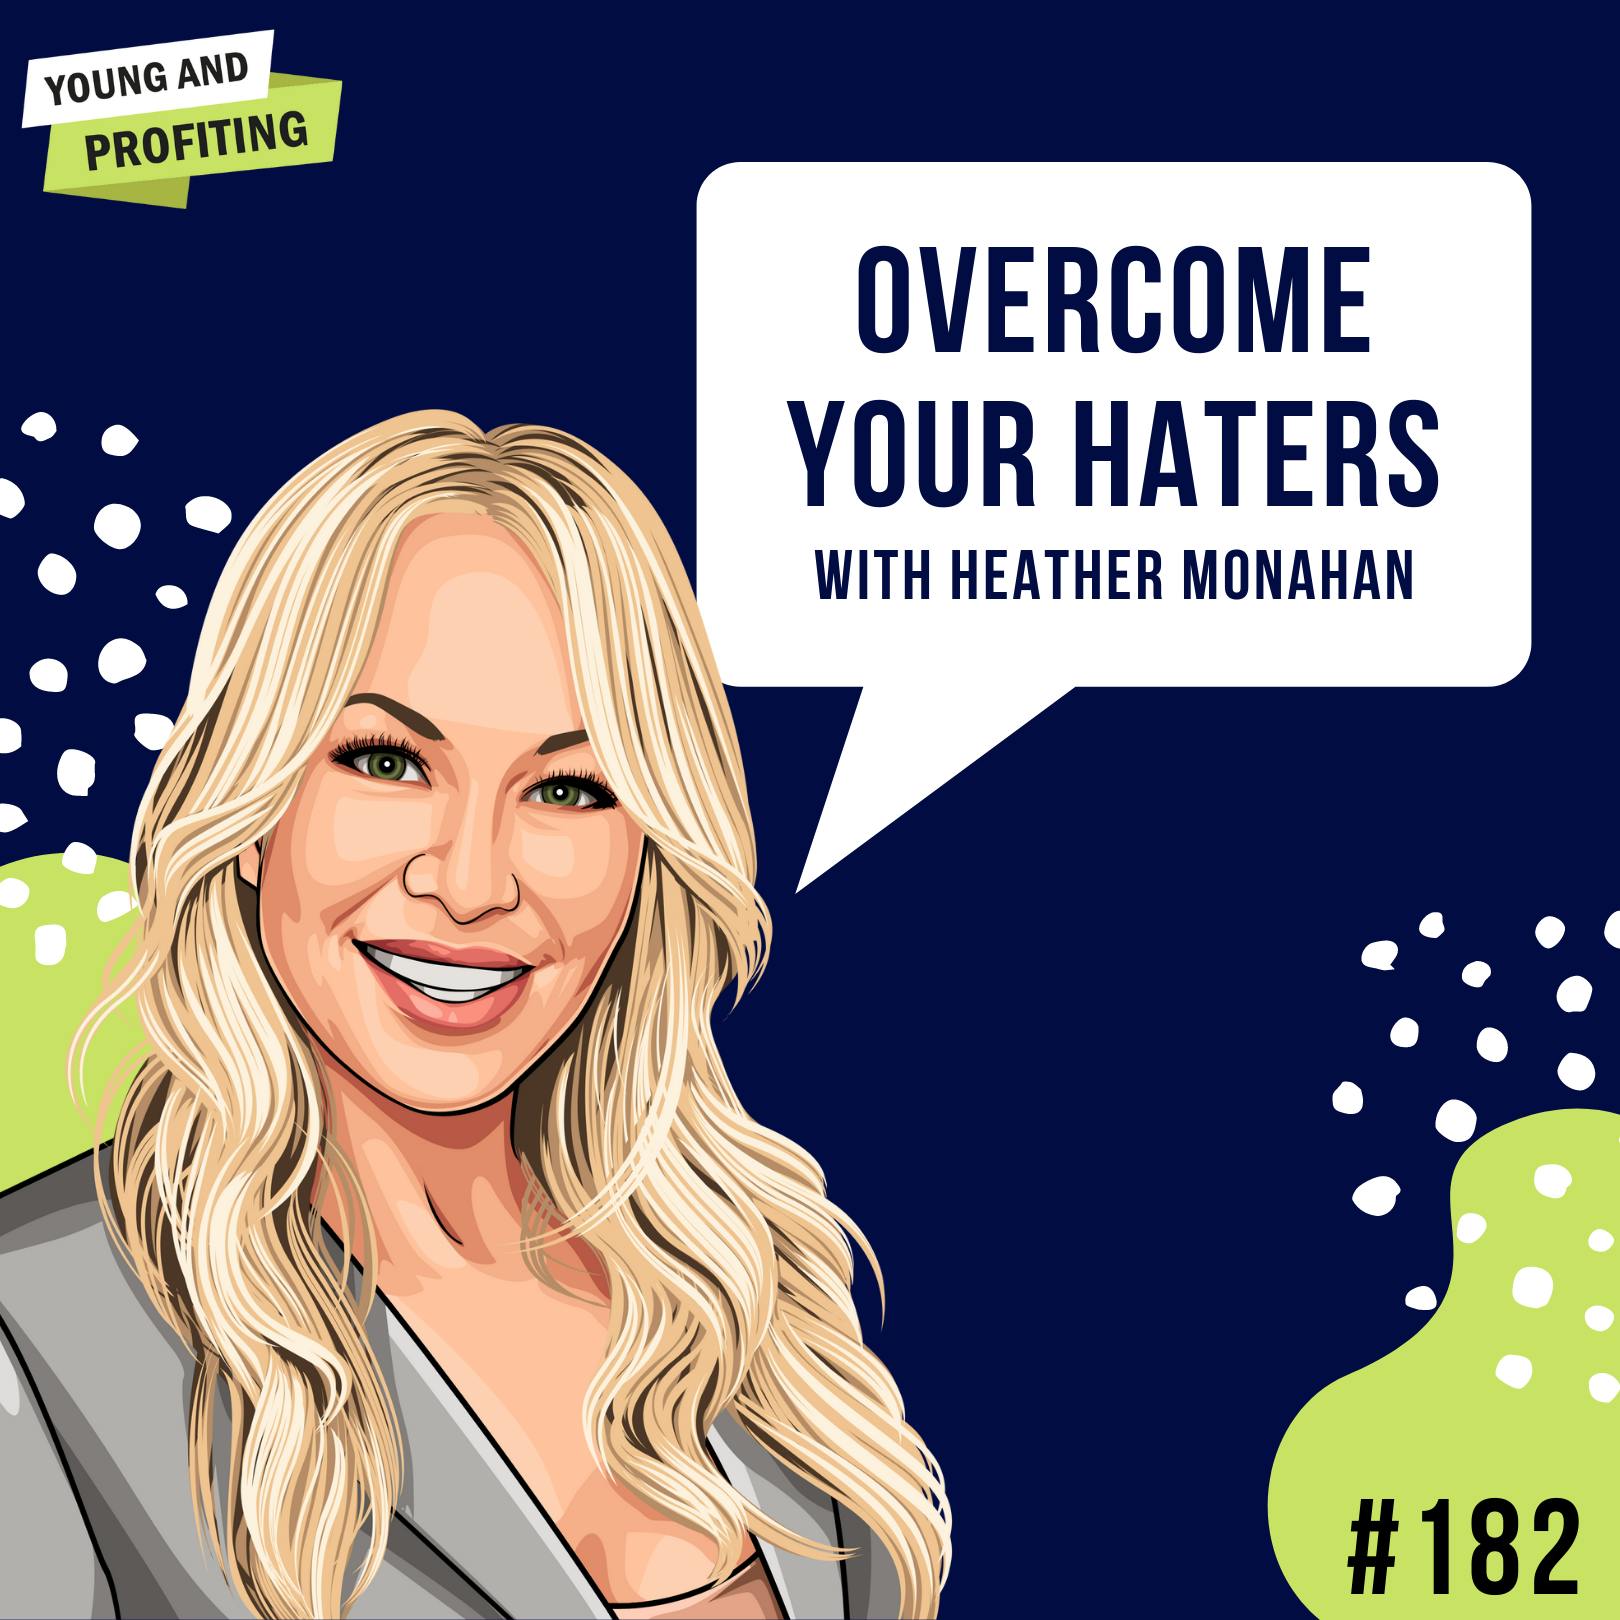 #182: Overcome Your Haters with Heather Monahan